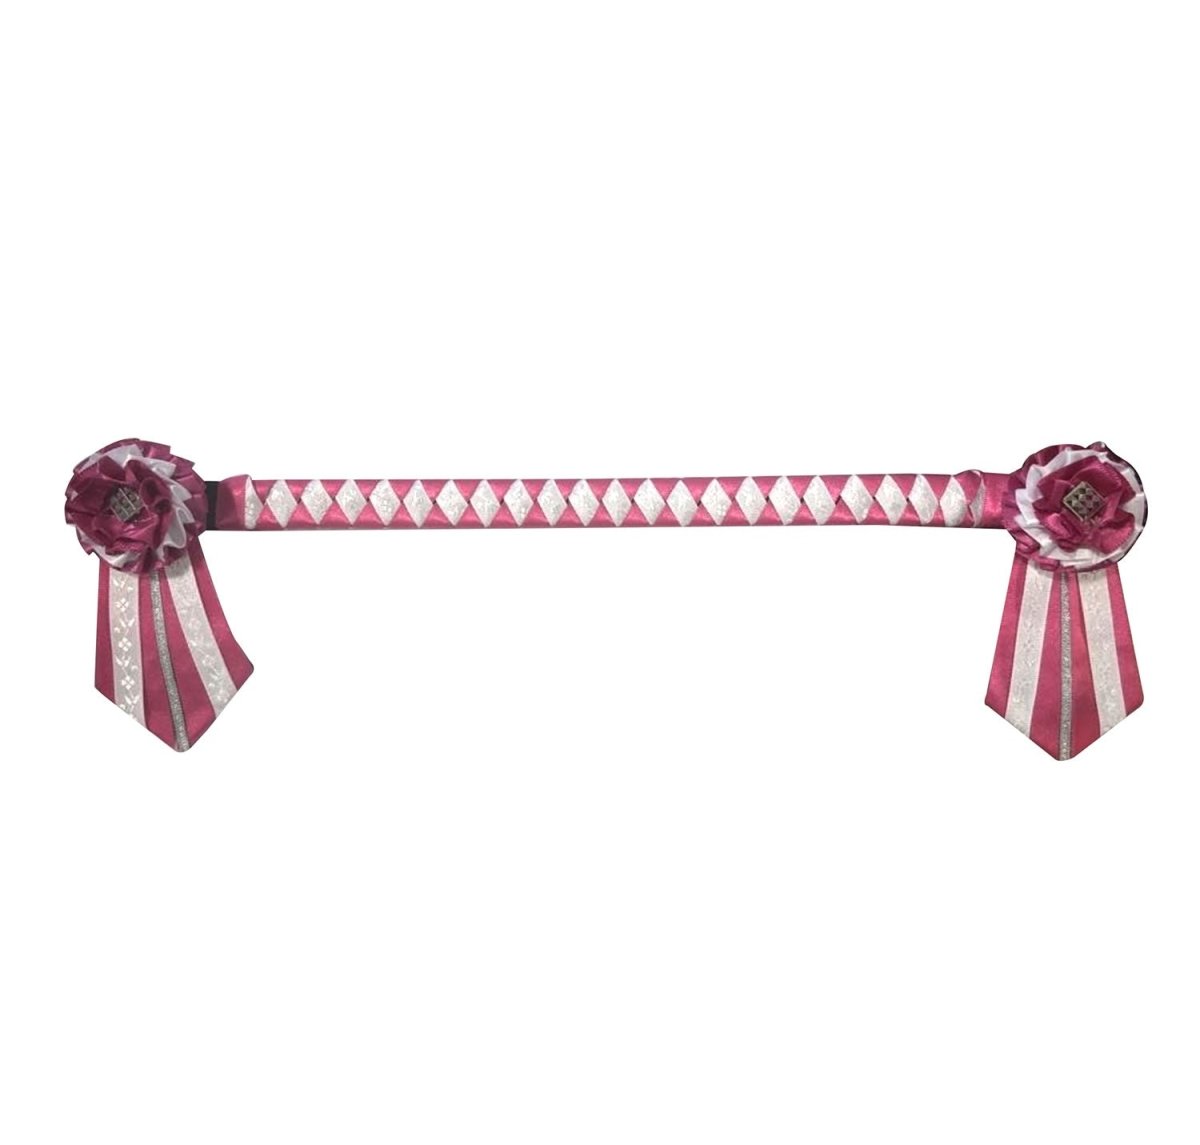 Showquest Browband Camden - Cerise/White - Full